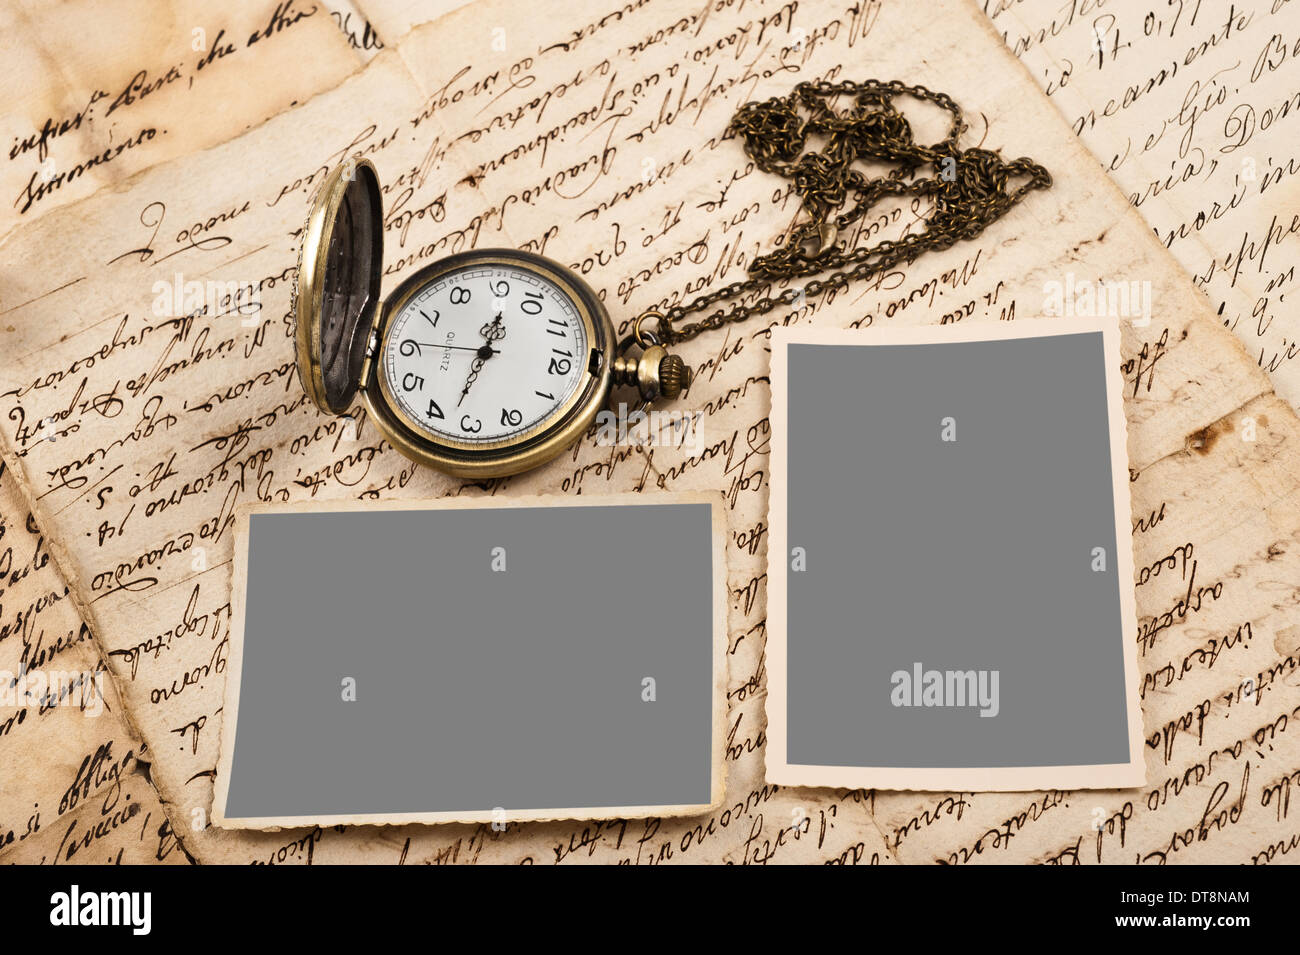 Letters with pictures and vintage pocket watch Stock Photo